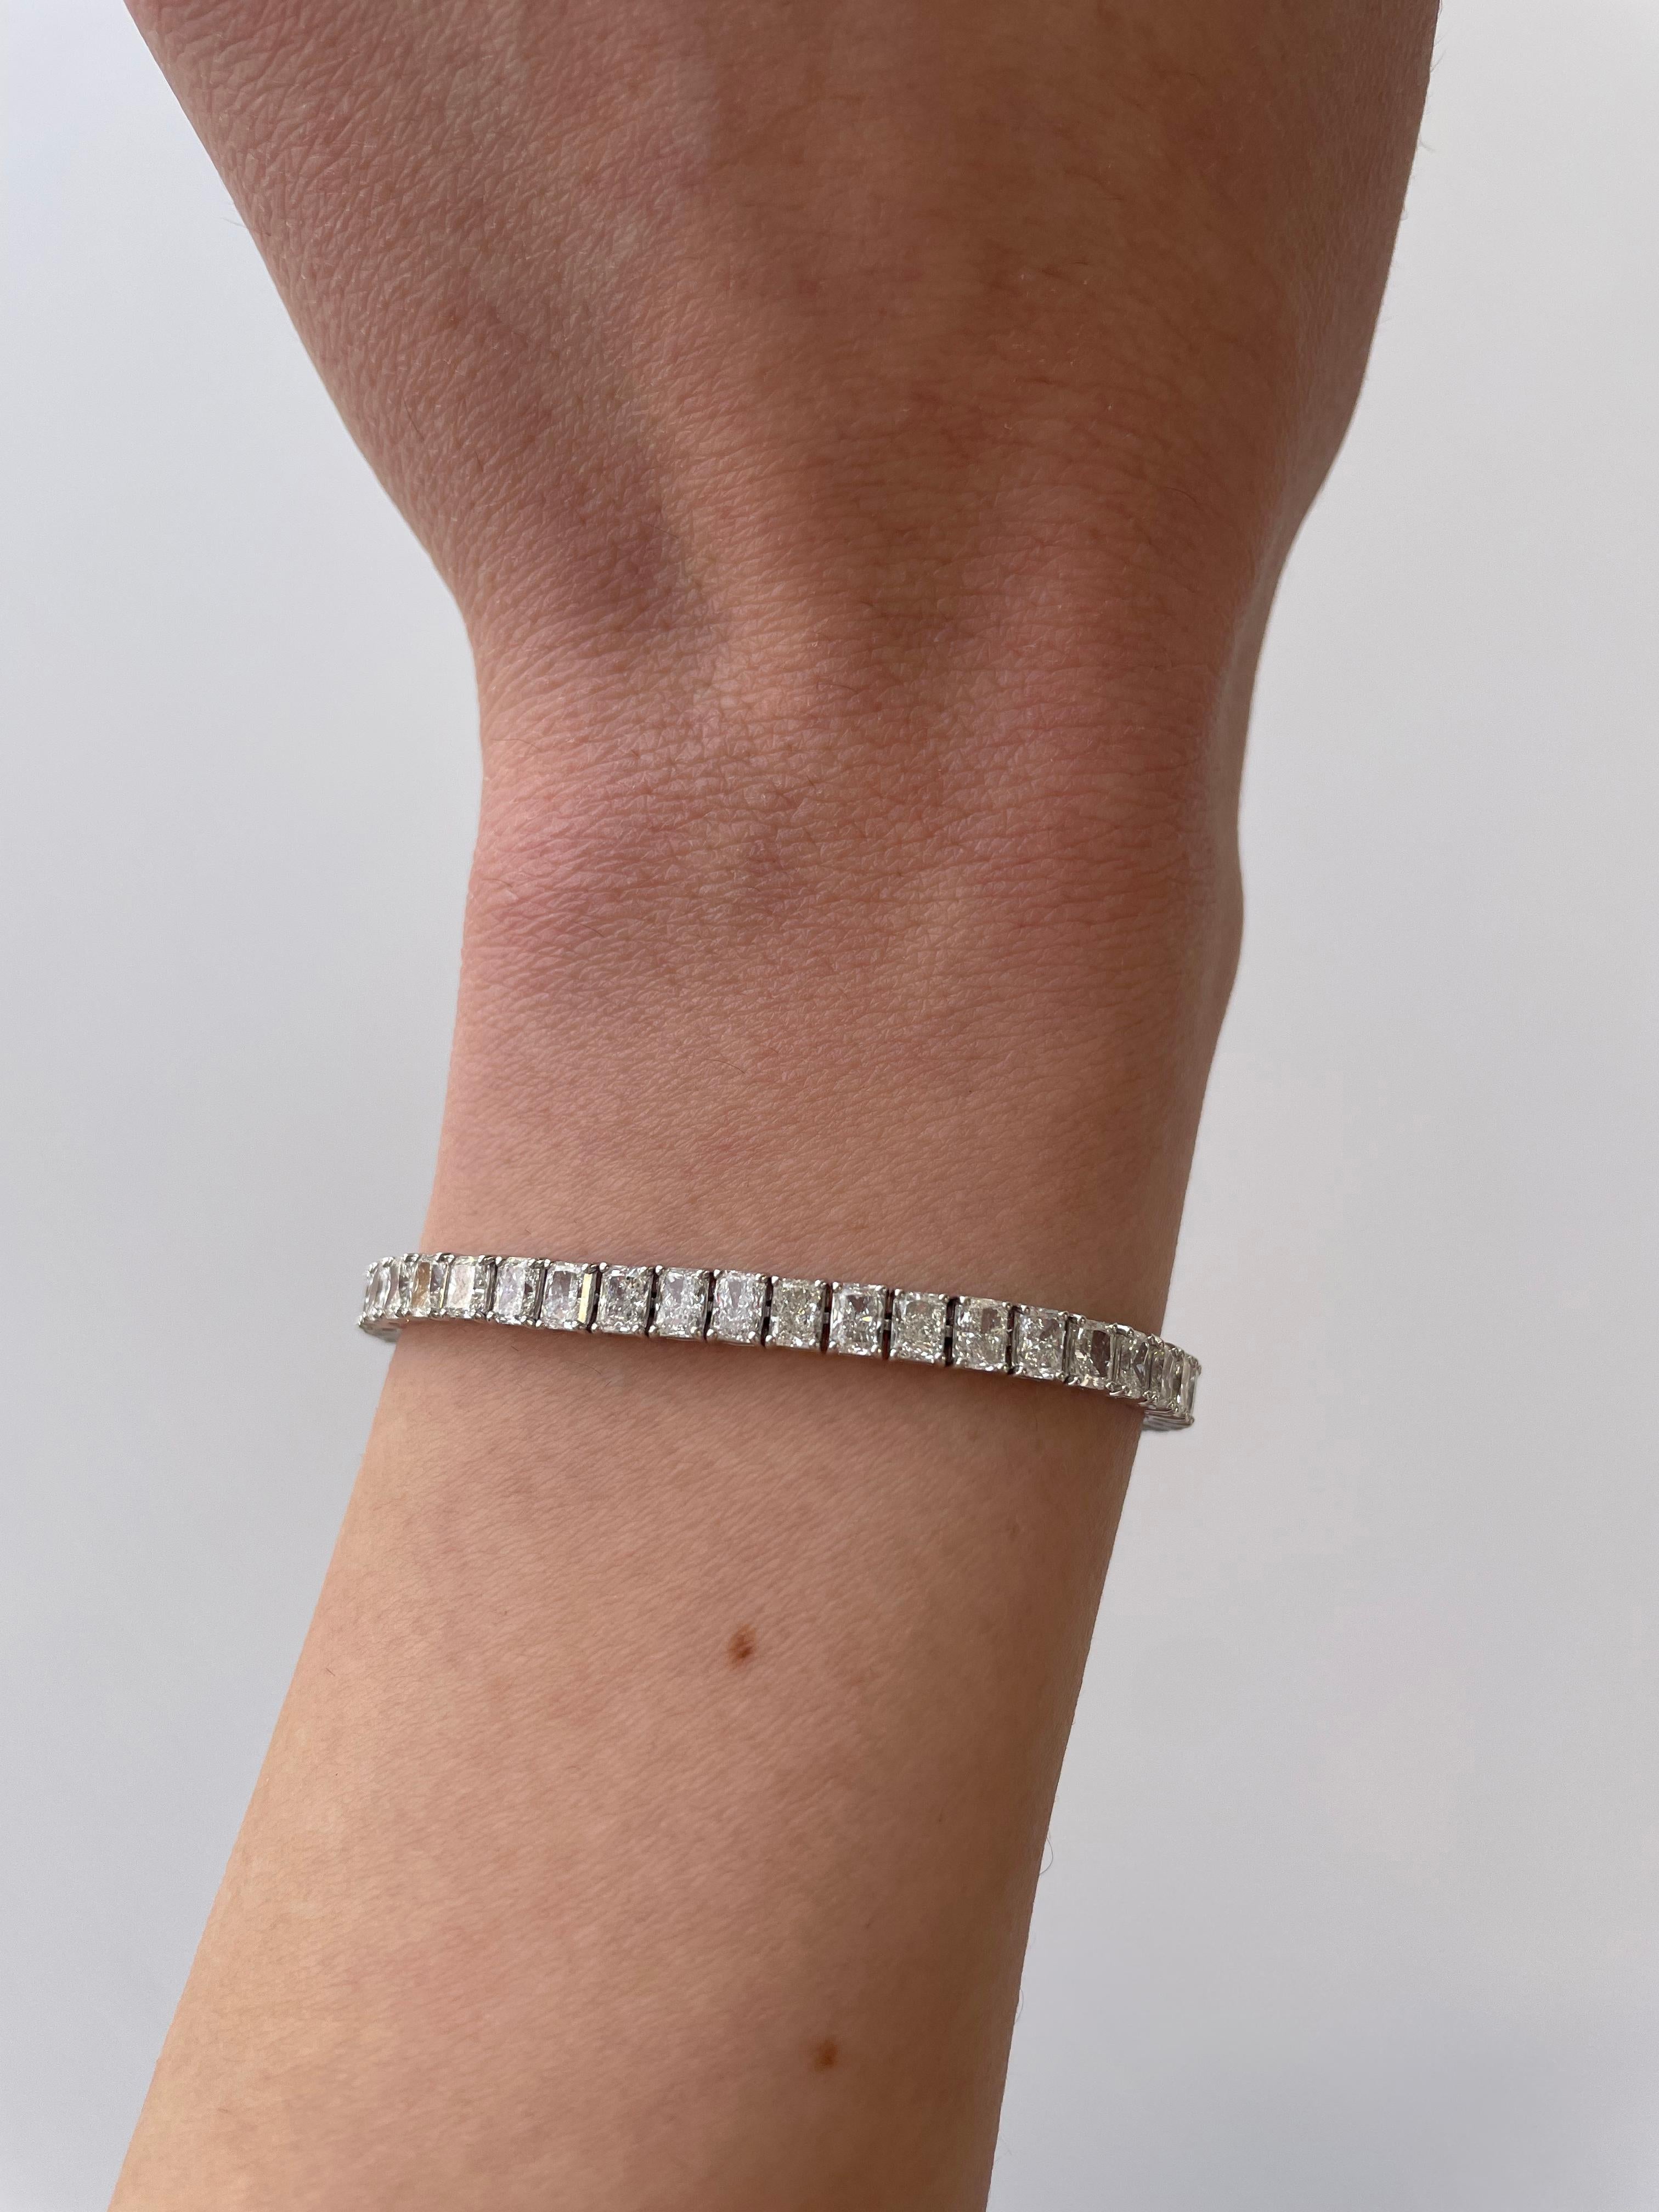 Stunning modern straight radiant cut diamond tennis bracelet. High jewelry by Alexander Beverly Hills.
54 radiant cut diamonds, 9.54 carats. Approximately G/H color and VS2/SI1 clarity. 18k white gold, 10.53 grams.
Accommodated with an up to date